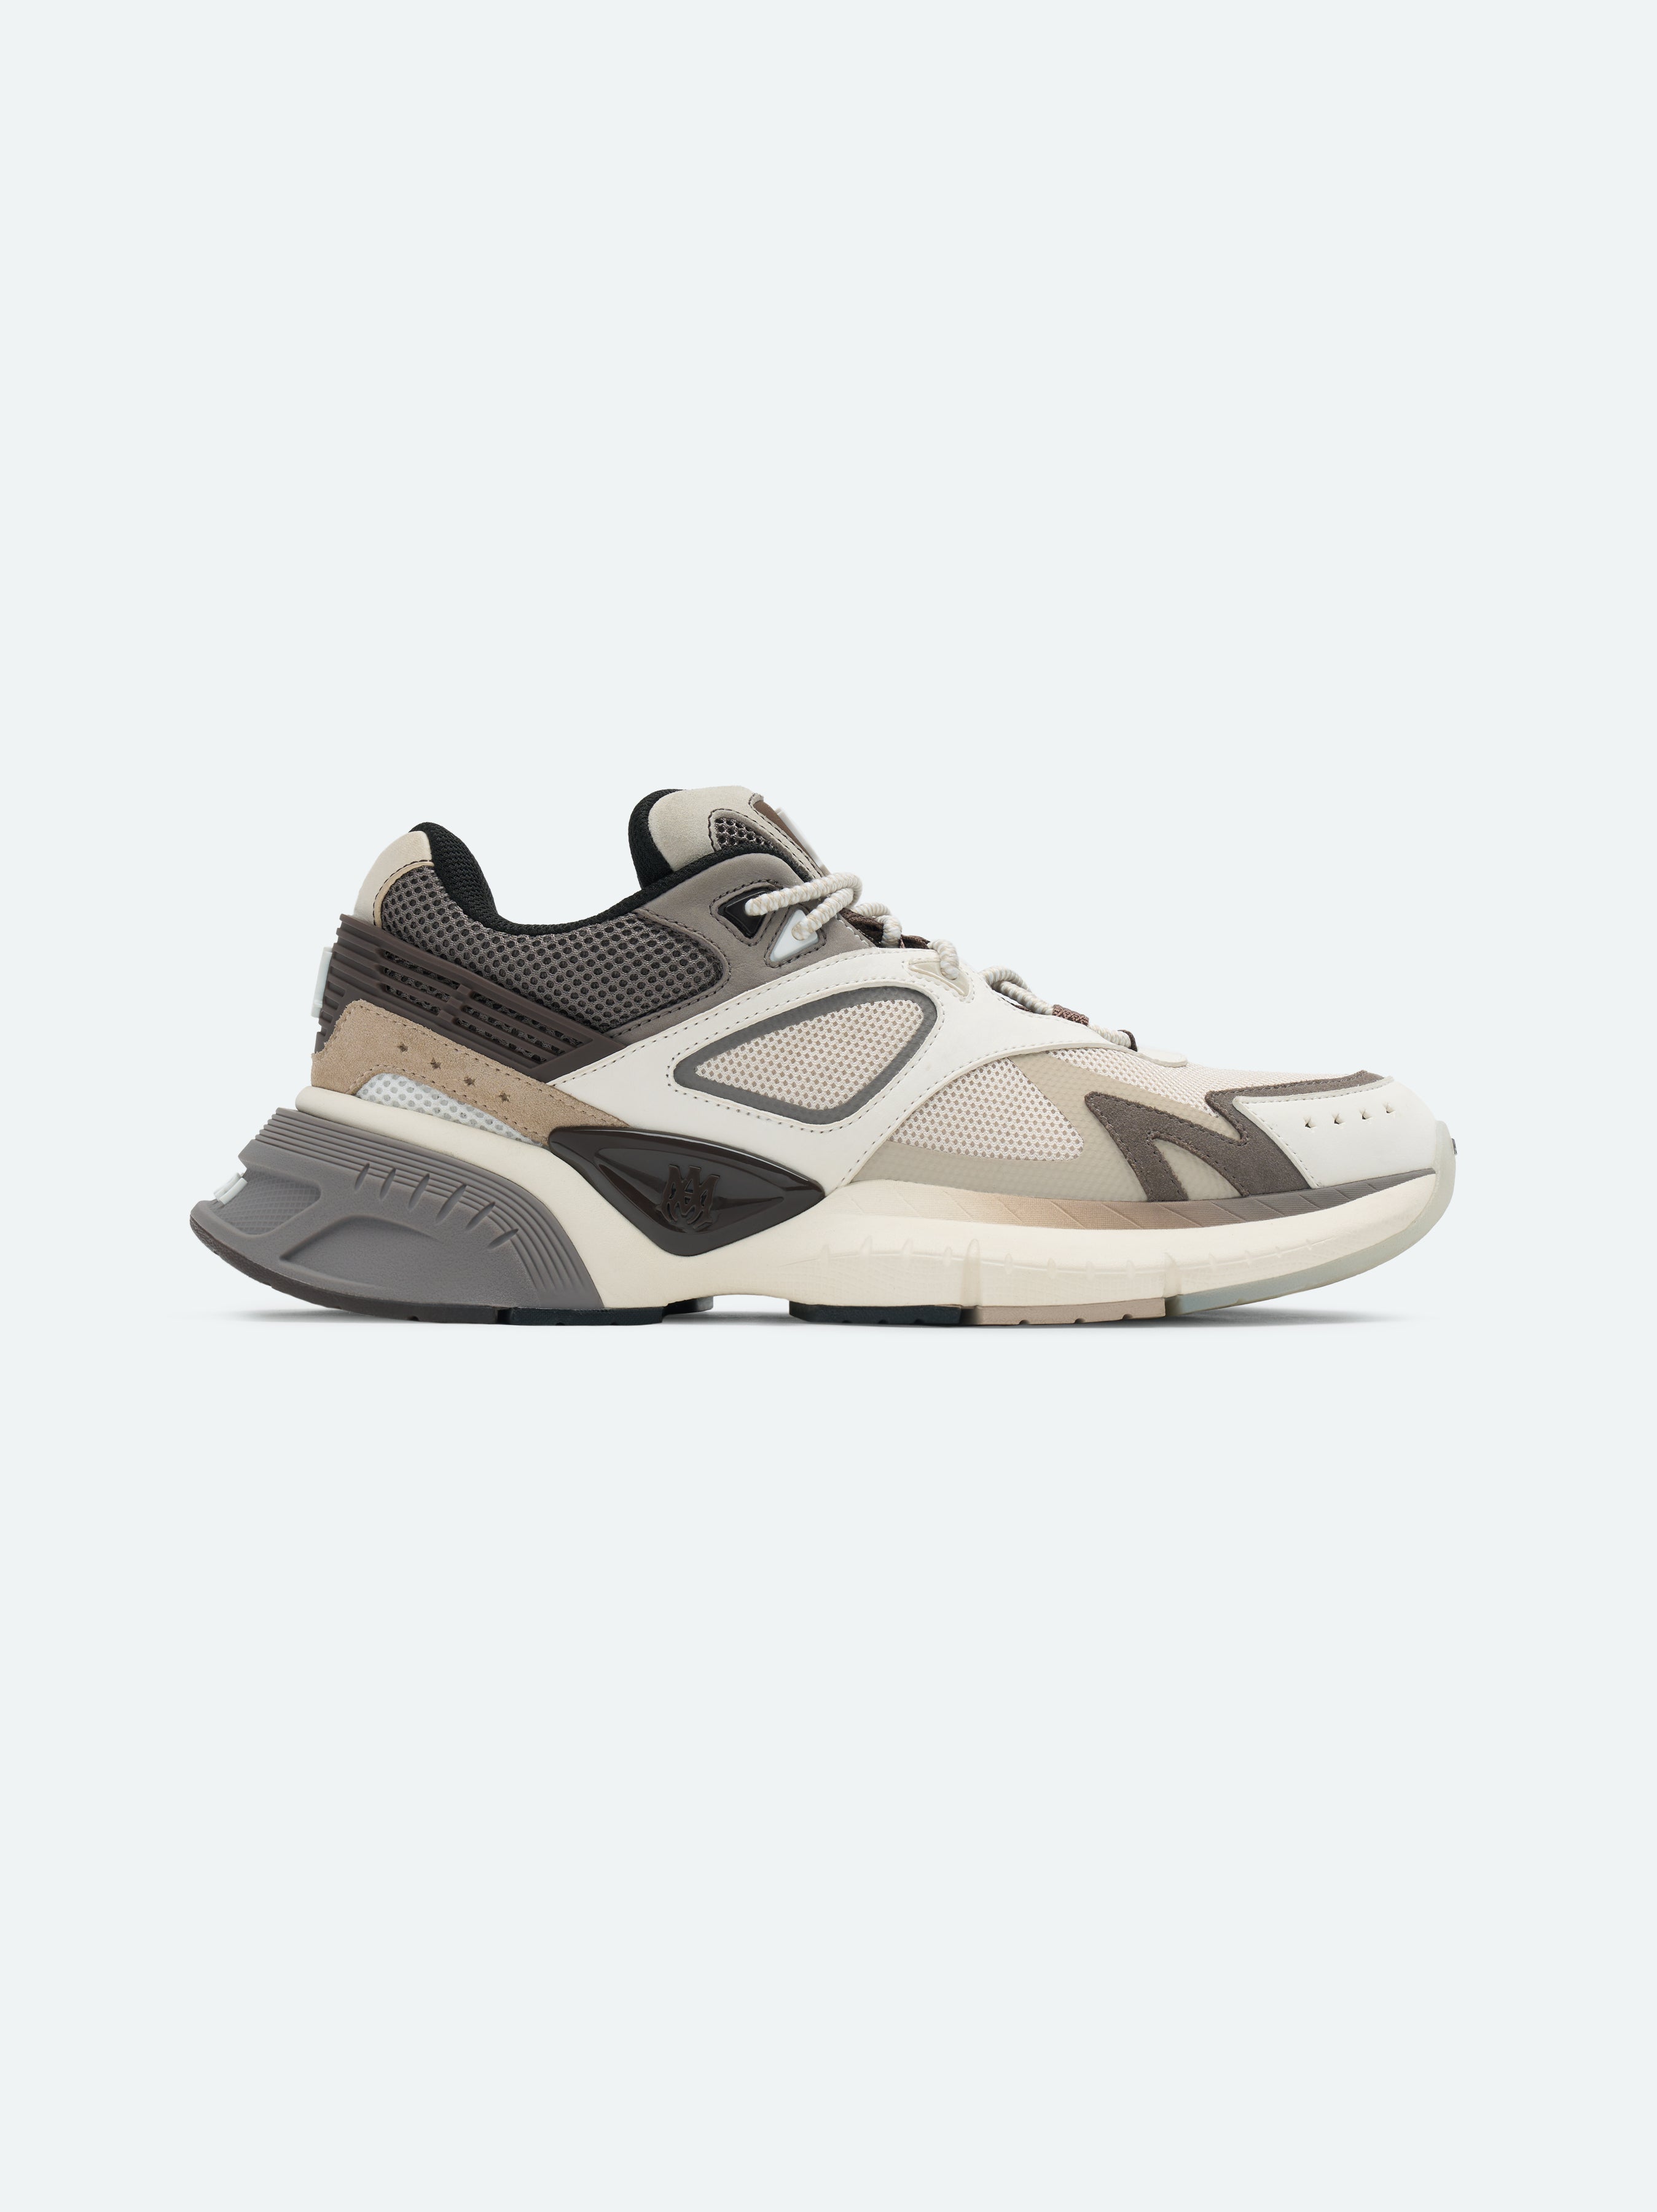 Product WOMEN - WOMEN'S MA RUNNER - Brown featured image